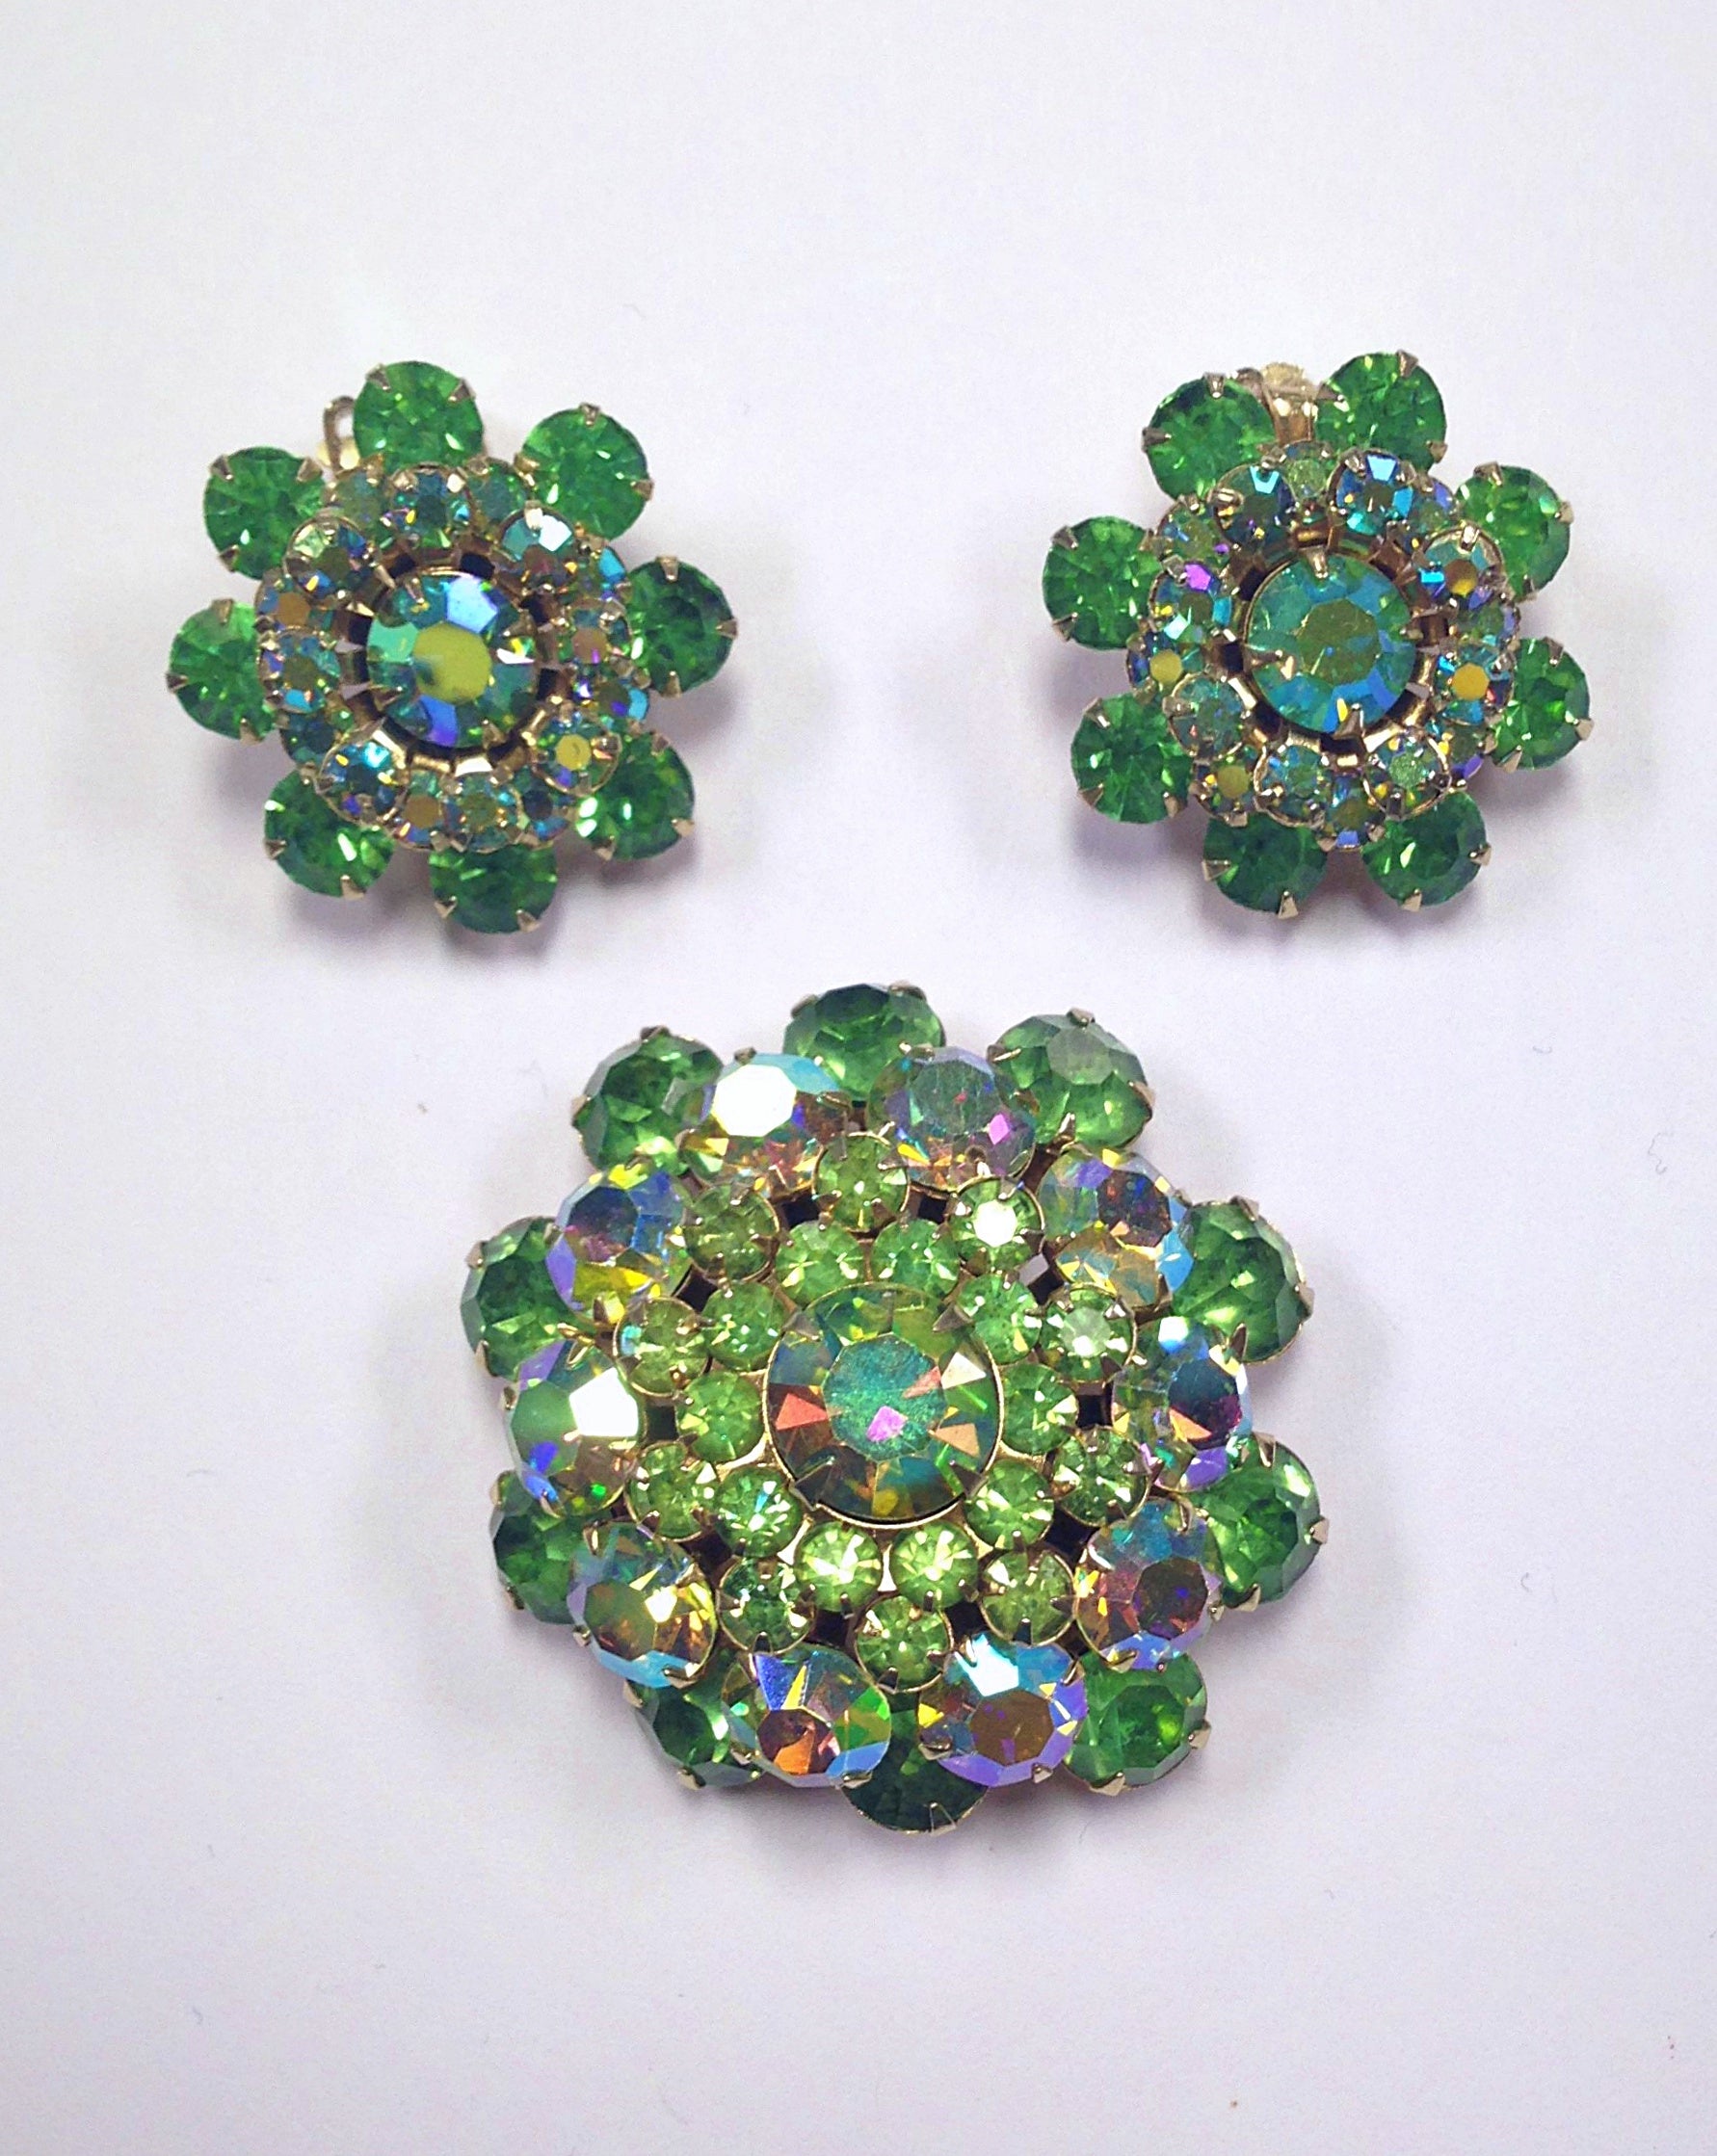 Buy the VNTG Icy Green Clear Earrings Brooch